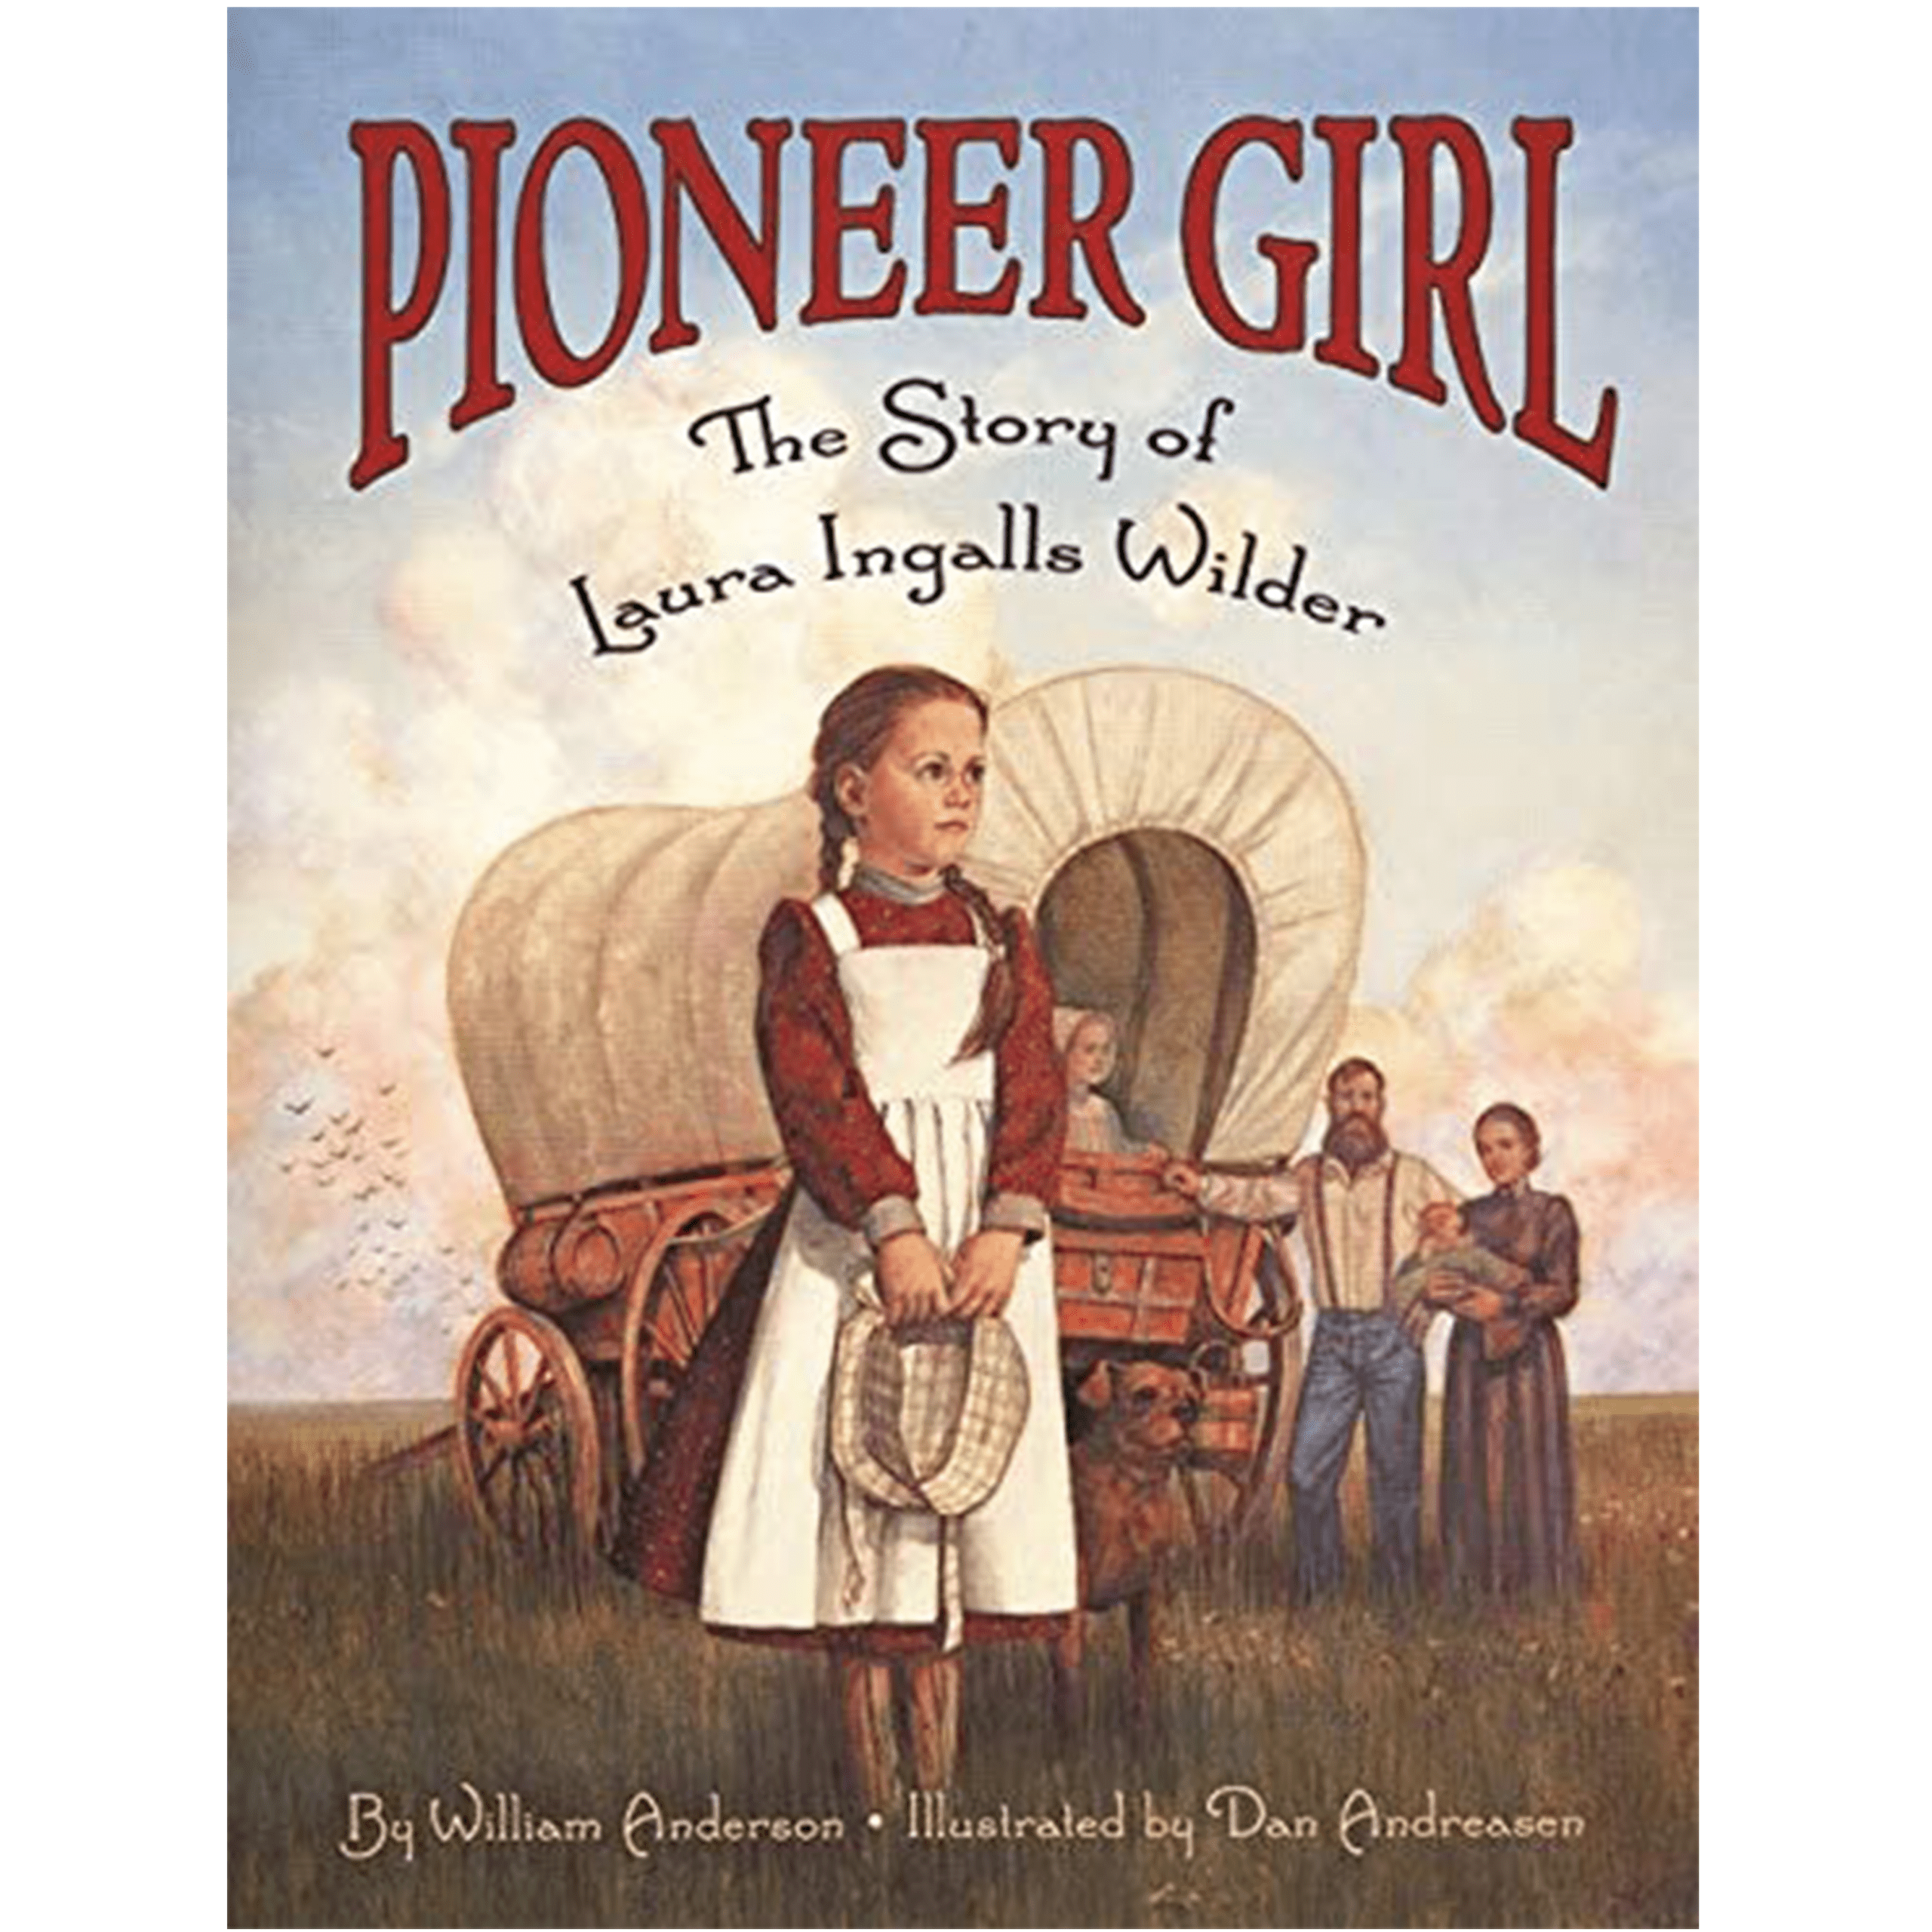 Pioneer Girl: The Story of Laura Ingalls Wilder by William Anderson